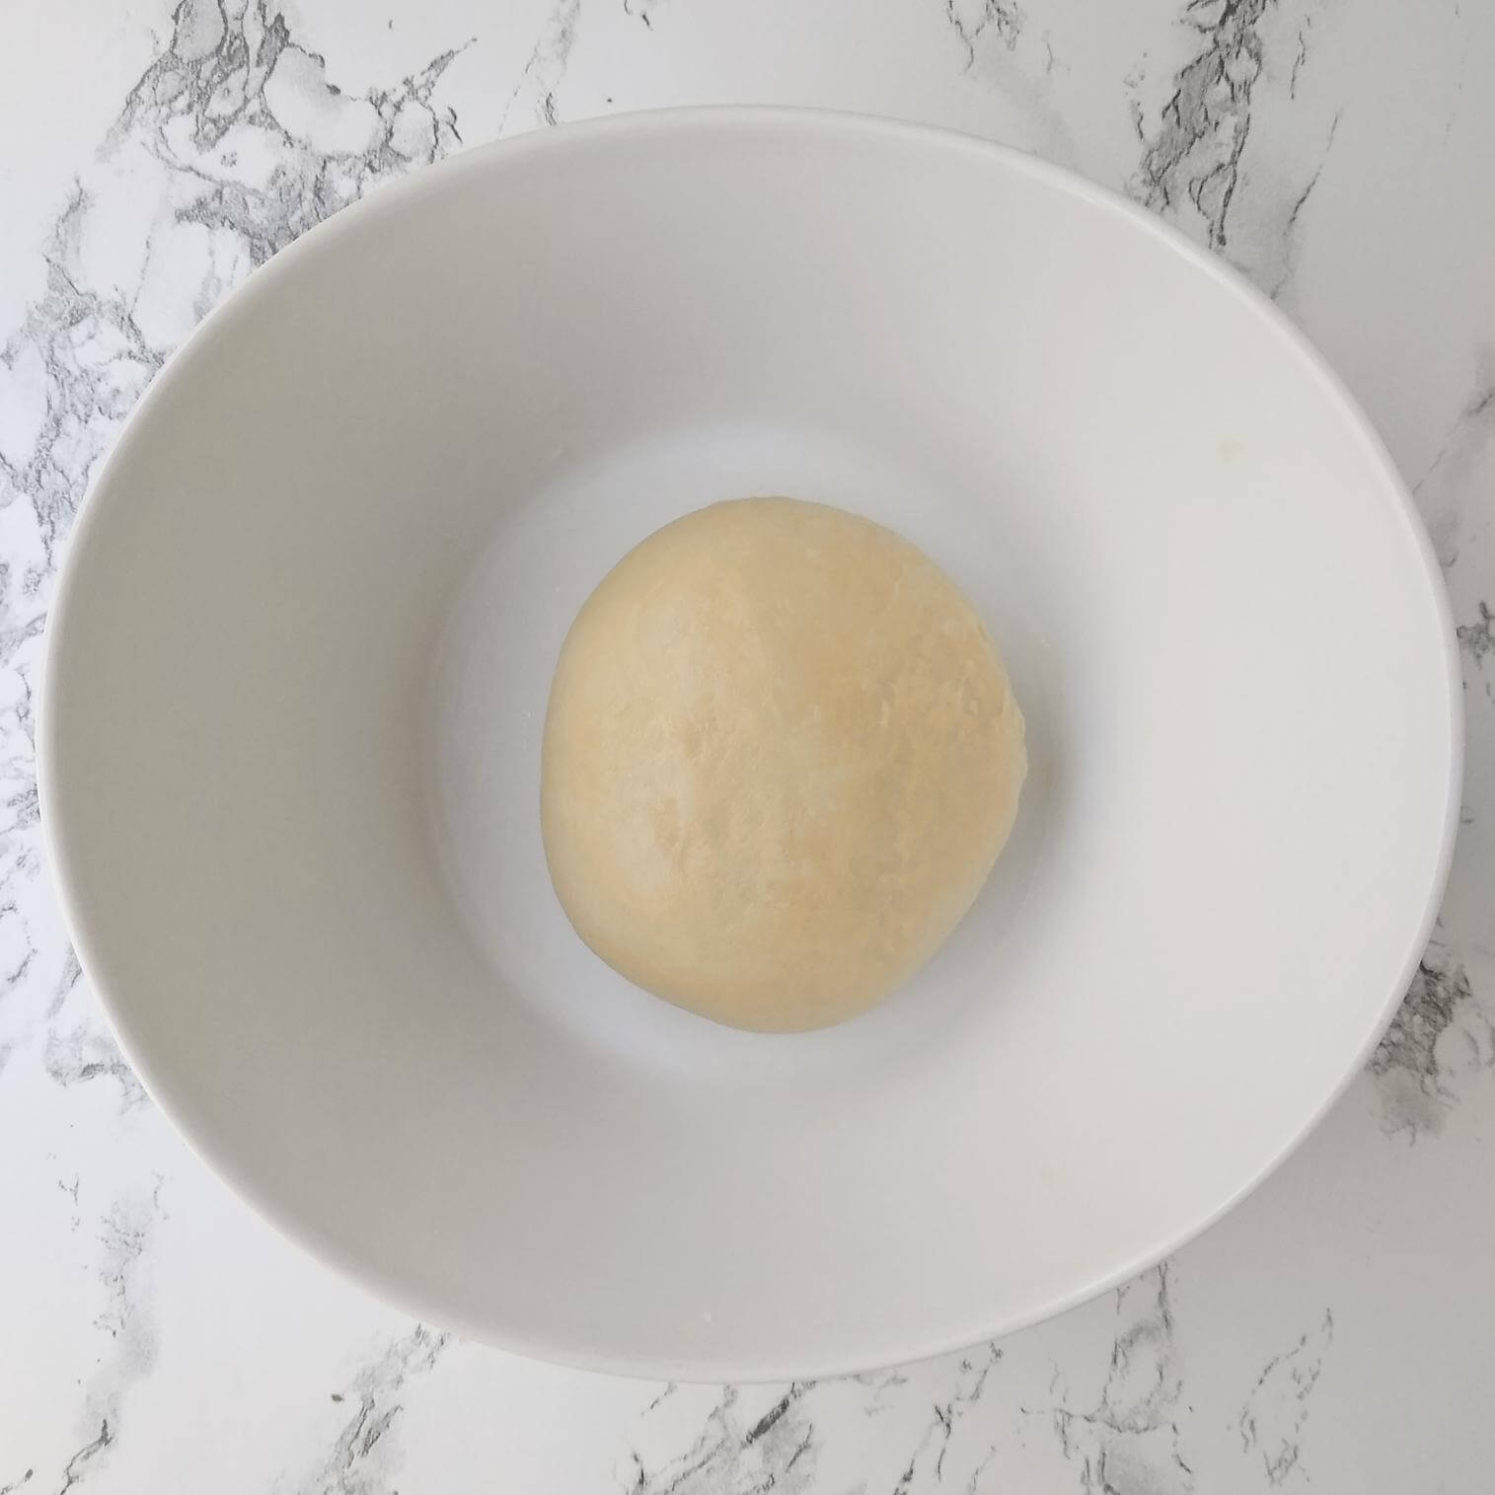 Water Dough Kneaded Smooth